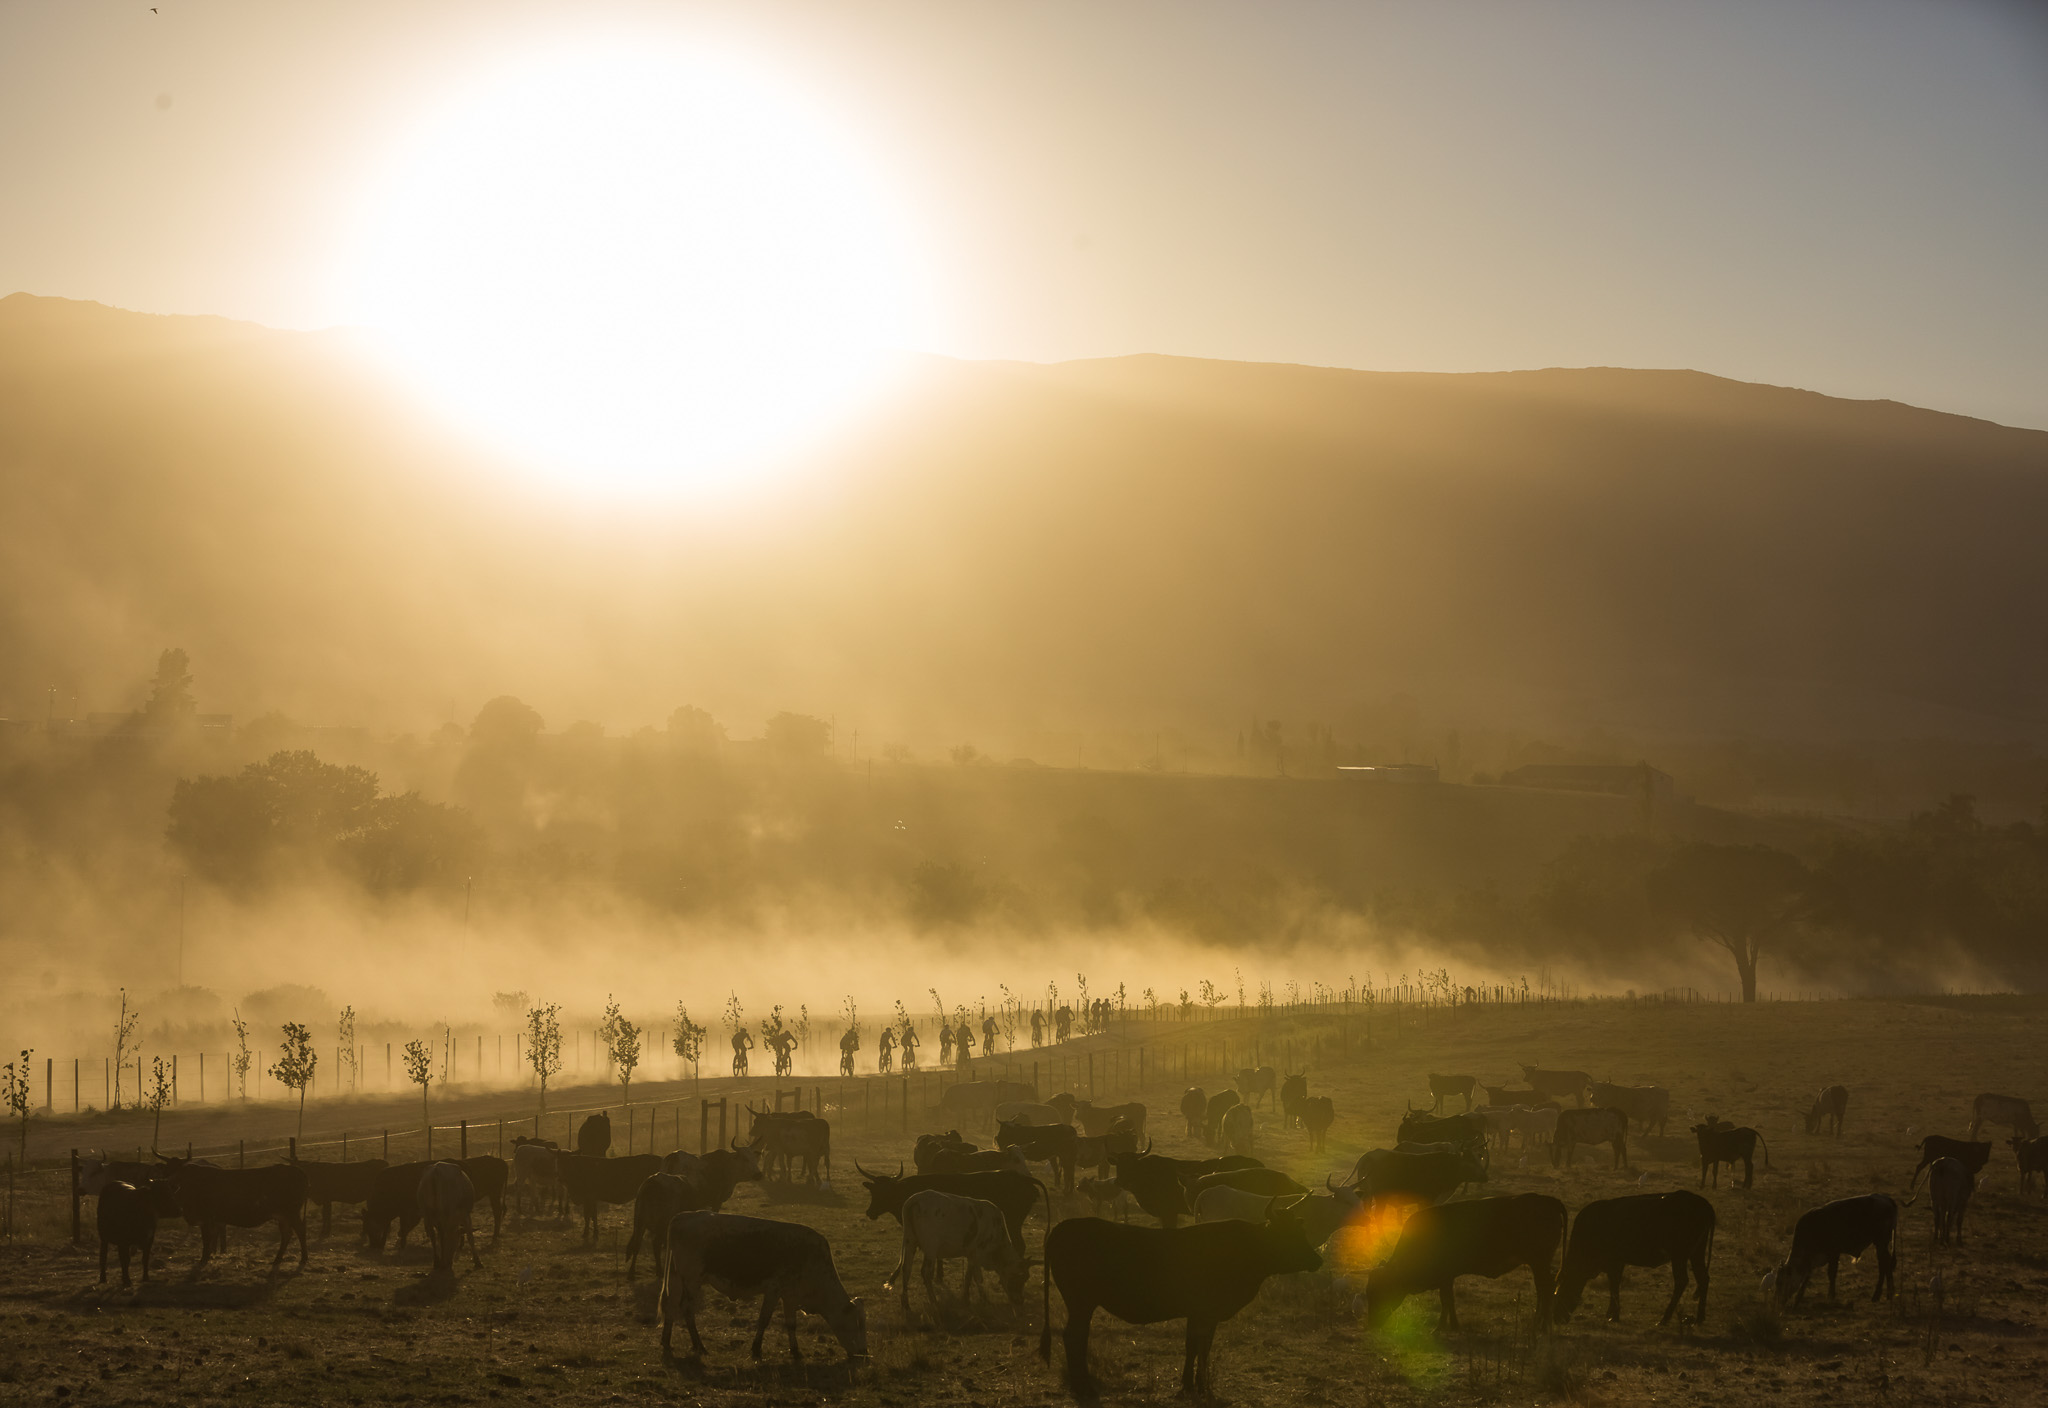 Sunrise over the Lead riders during stage 1 of the 2016 Absa Cape Epic Mountain Bike stage race held from Saronsberg Wine Estate in Tulbagh, South Africa on the 14th March 2016 Photo by Dominic Barnardt/Cape Epic/SPORTZPICS PLEASE ENSURE THE APPROPRIATE CREDIT IS GIVEN TO THE PHOTOGRAPHER AND SPORTZPICS ALONG WITH THE ABSA CAPE EPIC ace2016